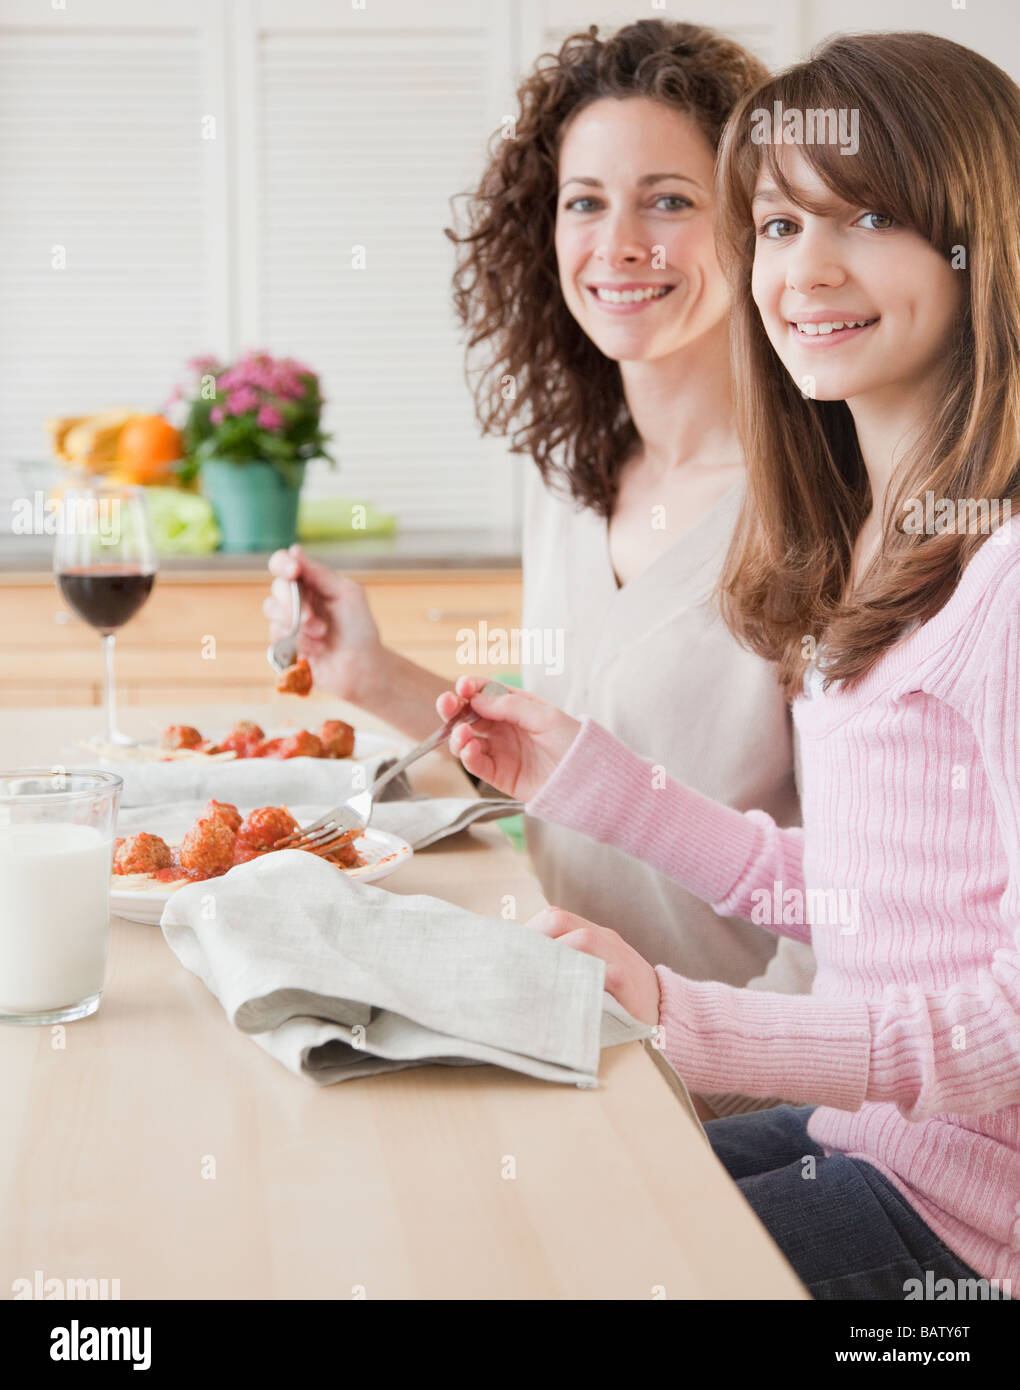 Mother and daughter (10-11 years) eating dinner, portrait Stock Photo